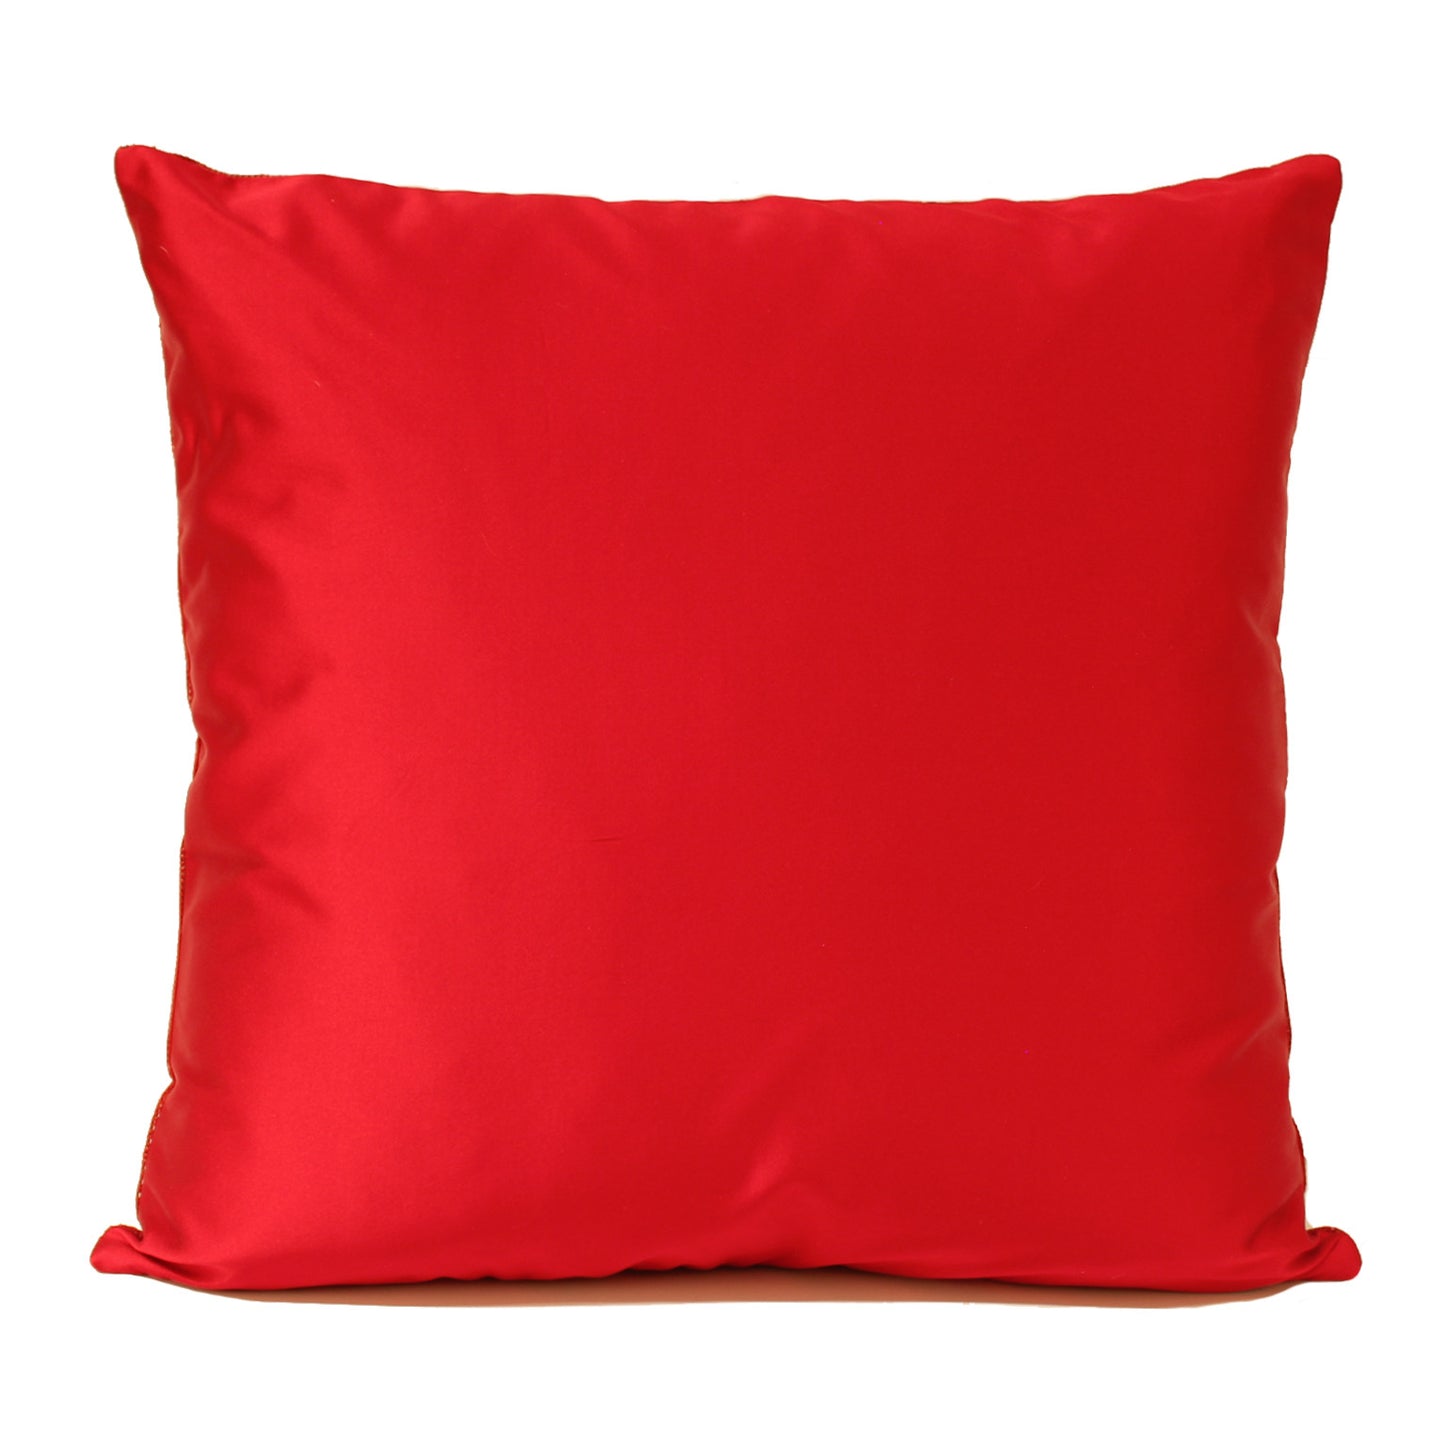 Red Perforated Leather Decorative Pillow